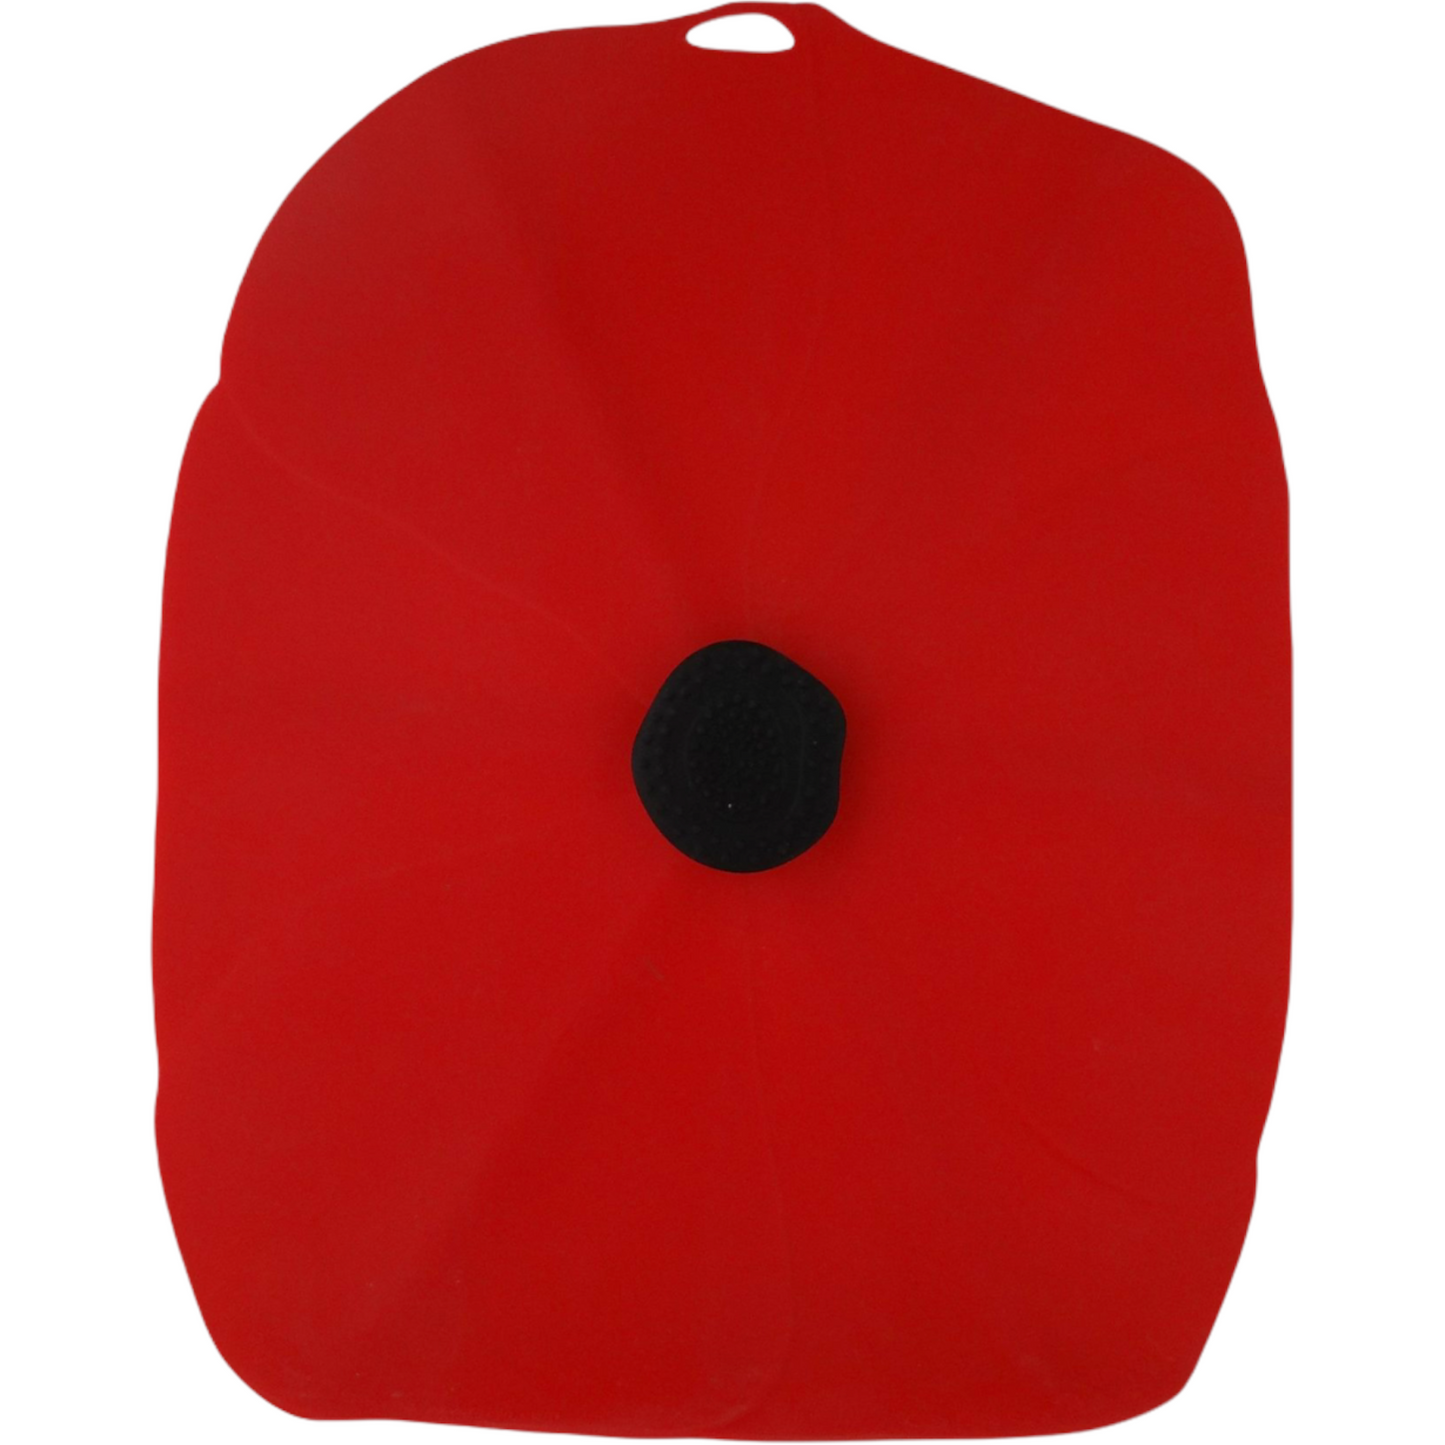 POPPY OBLONG SILICONE LID